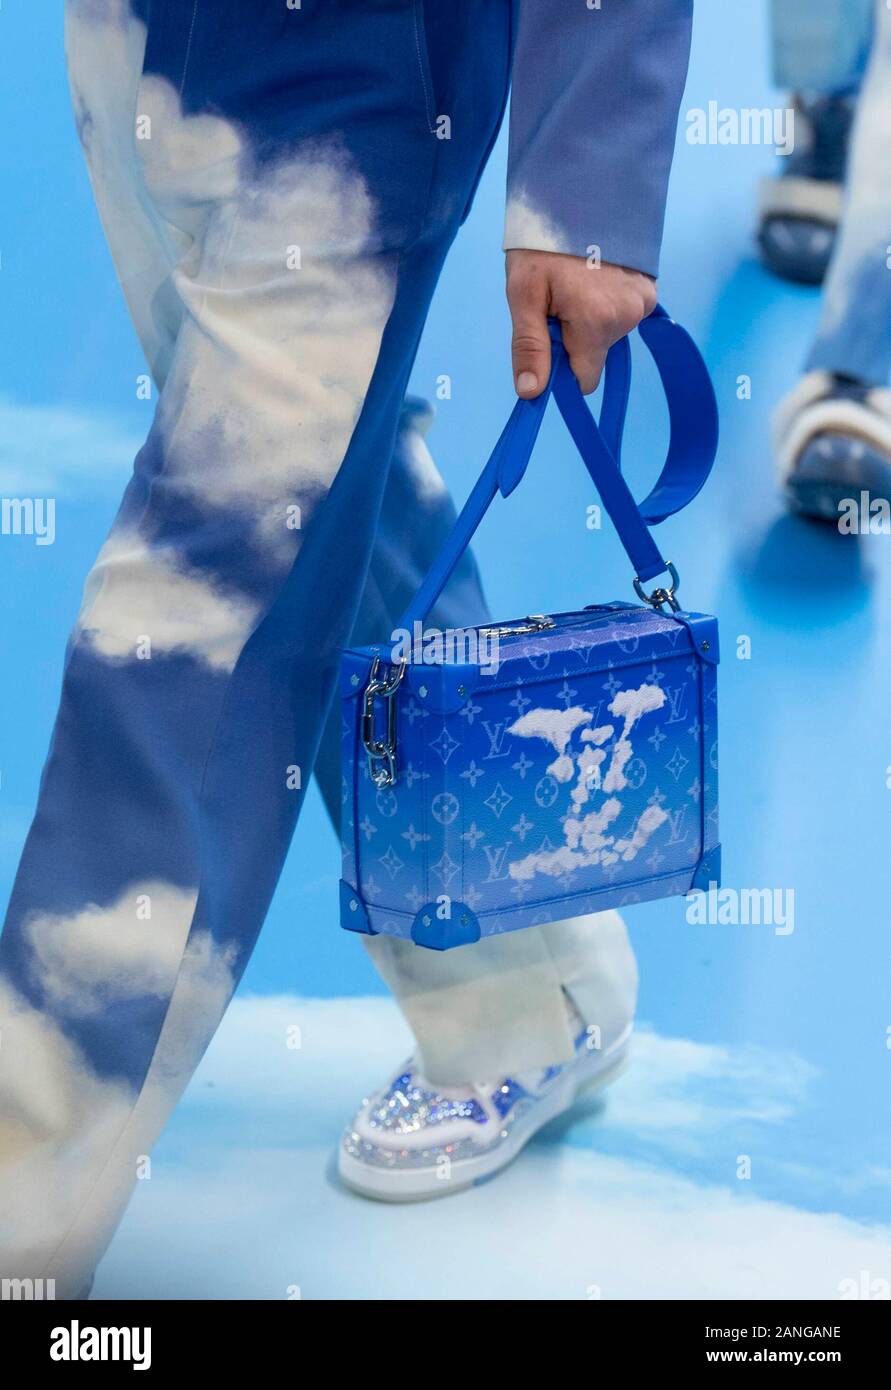 PFW Men's: Louis Vuitton Fall 2020 Ready-to-Wear Collection